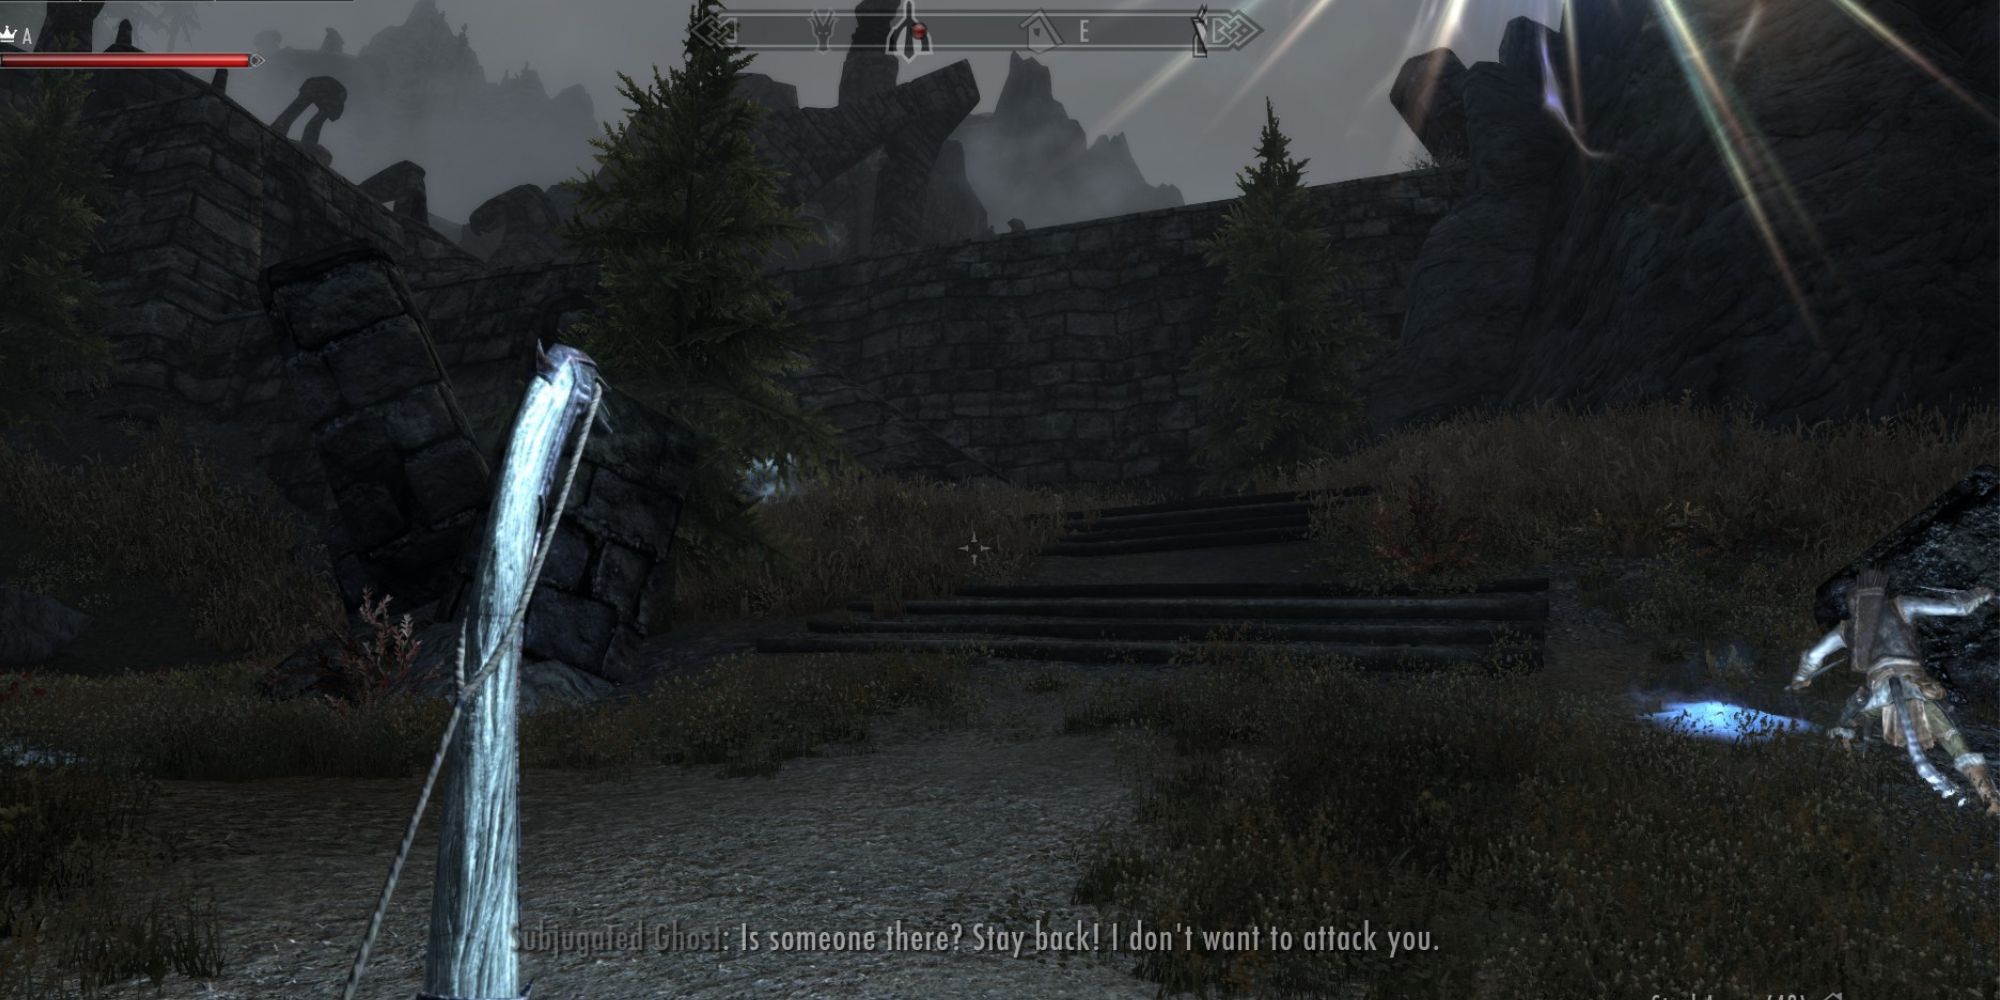 enemy ghost warns the co-op party in Skyrim Together Reborn but doesn't appear for the player